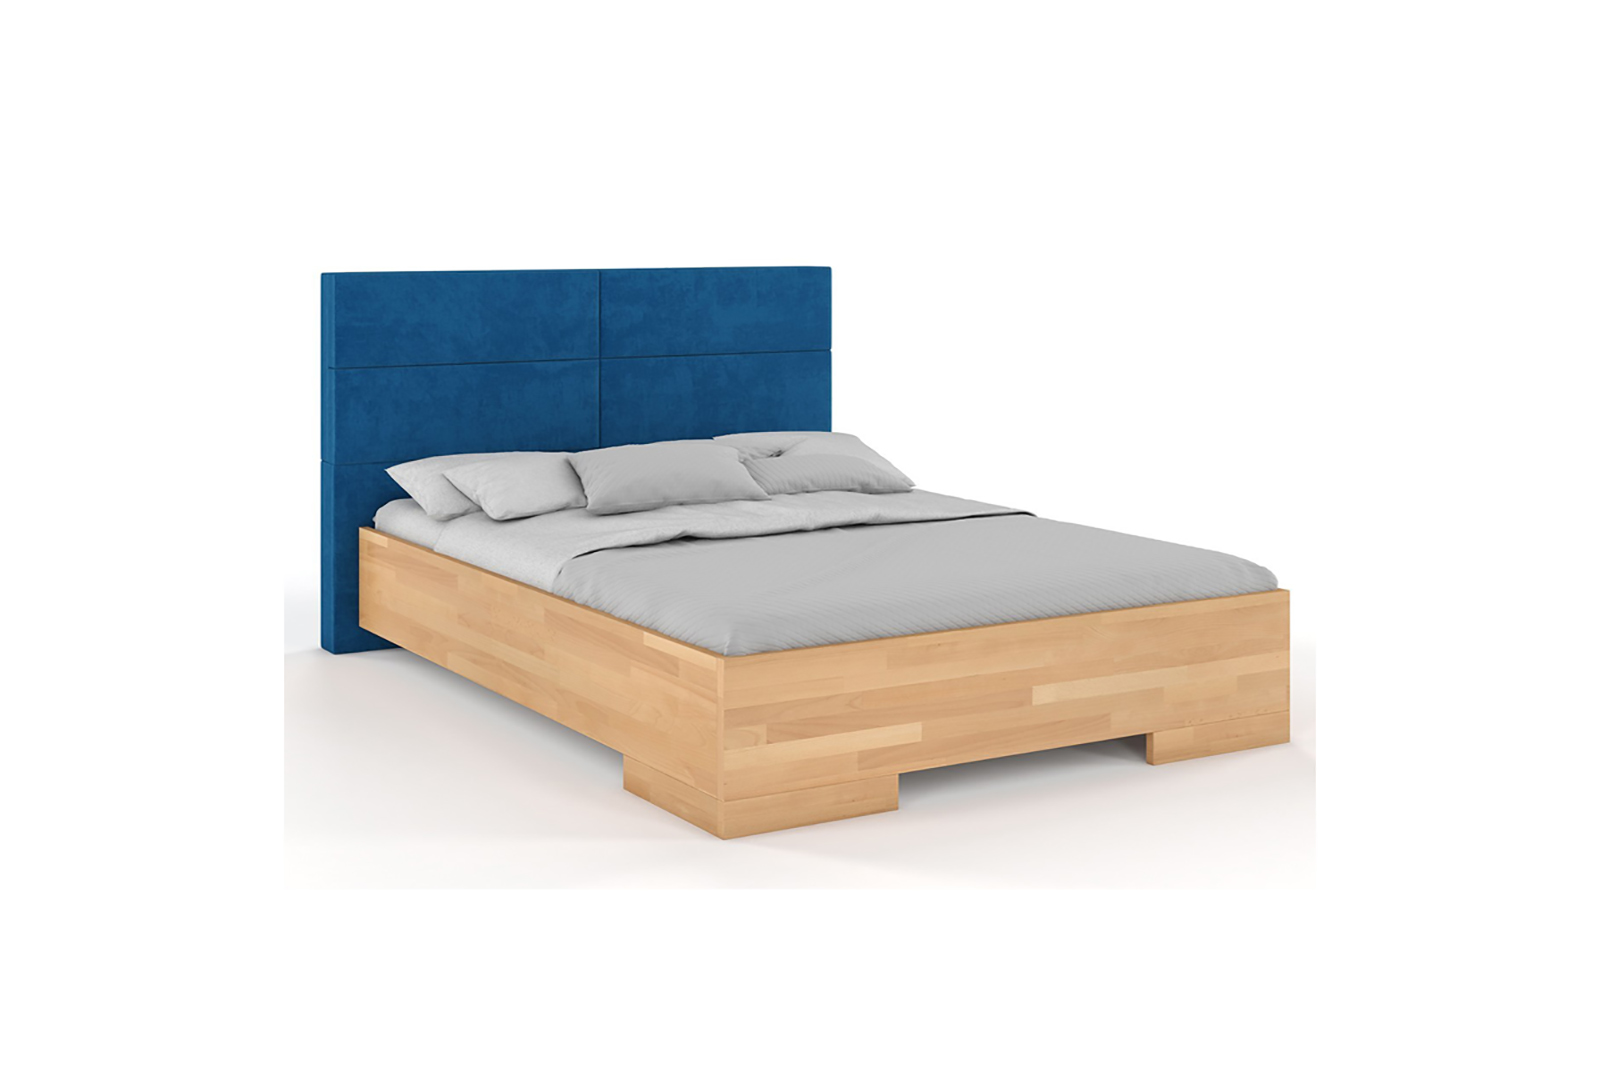 VISBY BERG WOODEN BEECH BED WITH AN UPHOLSTERED HEADBOARD